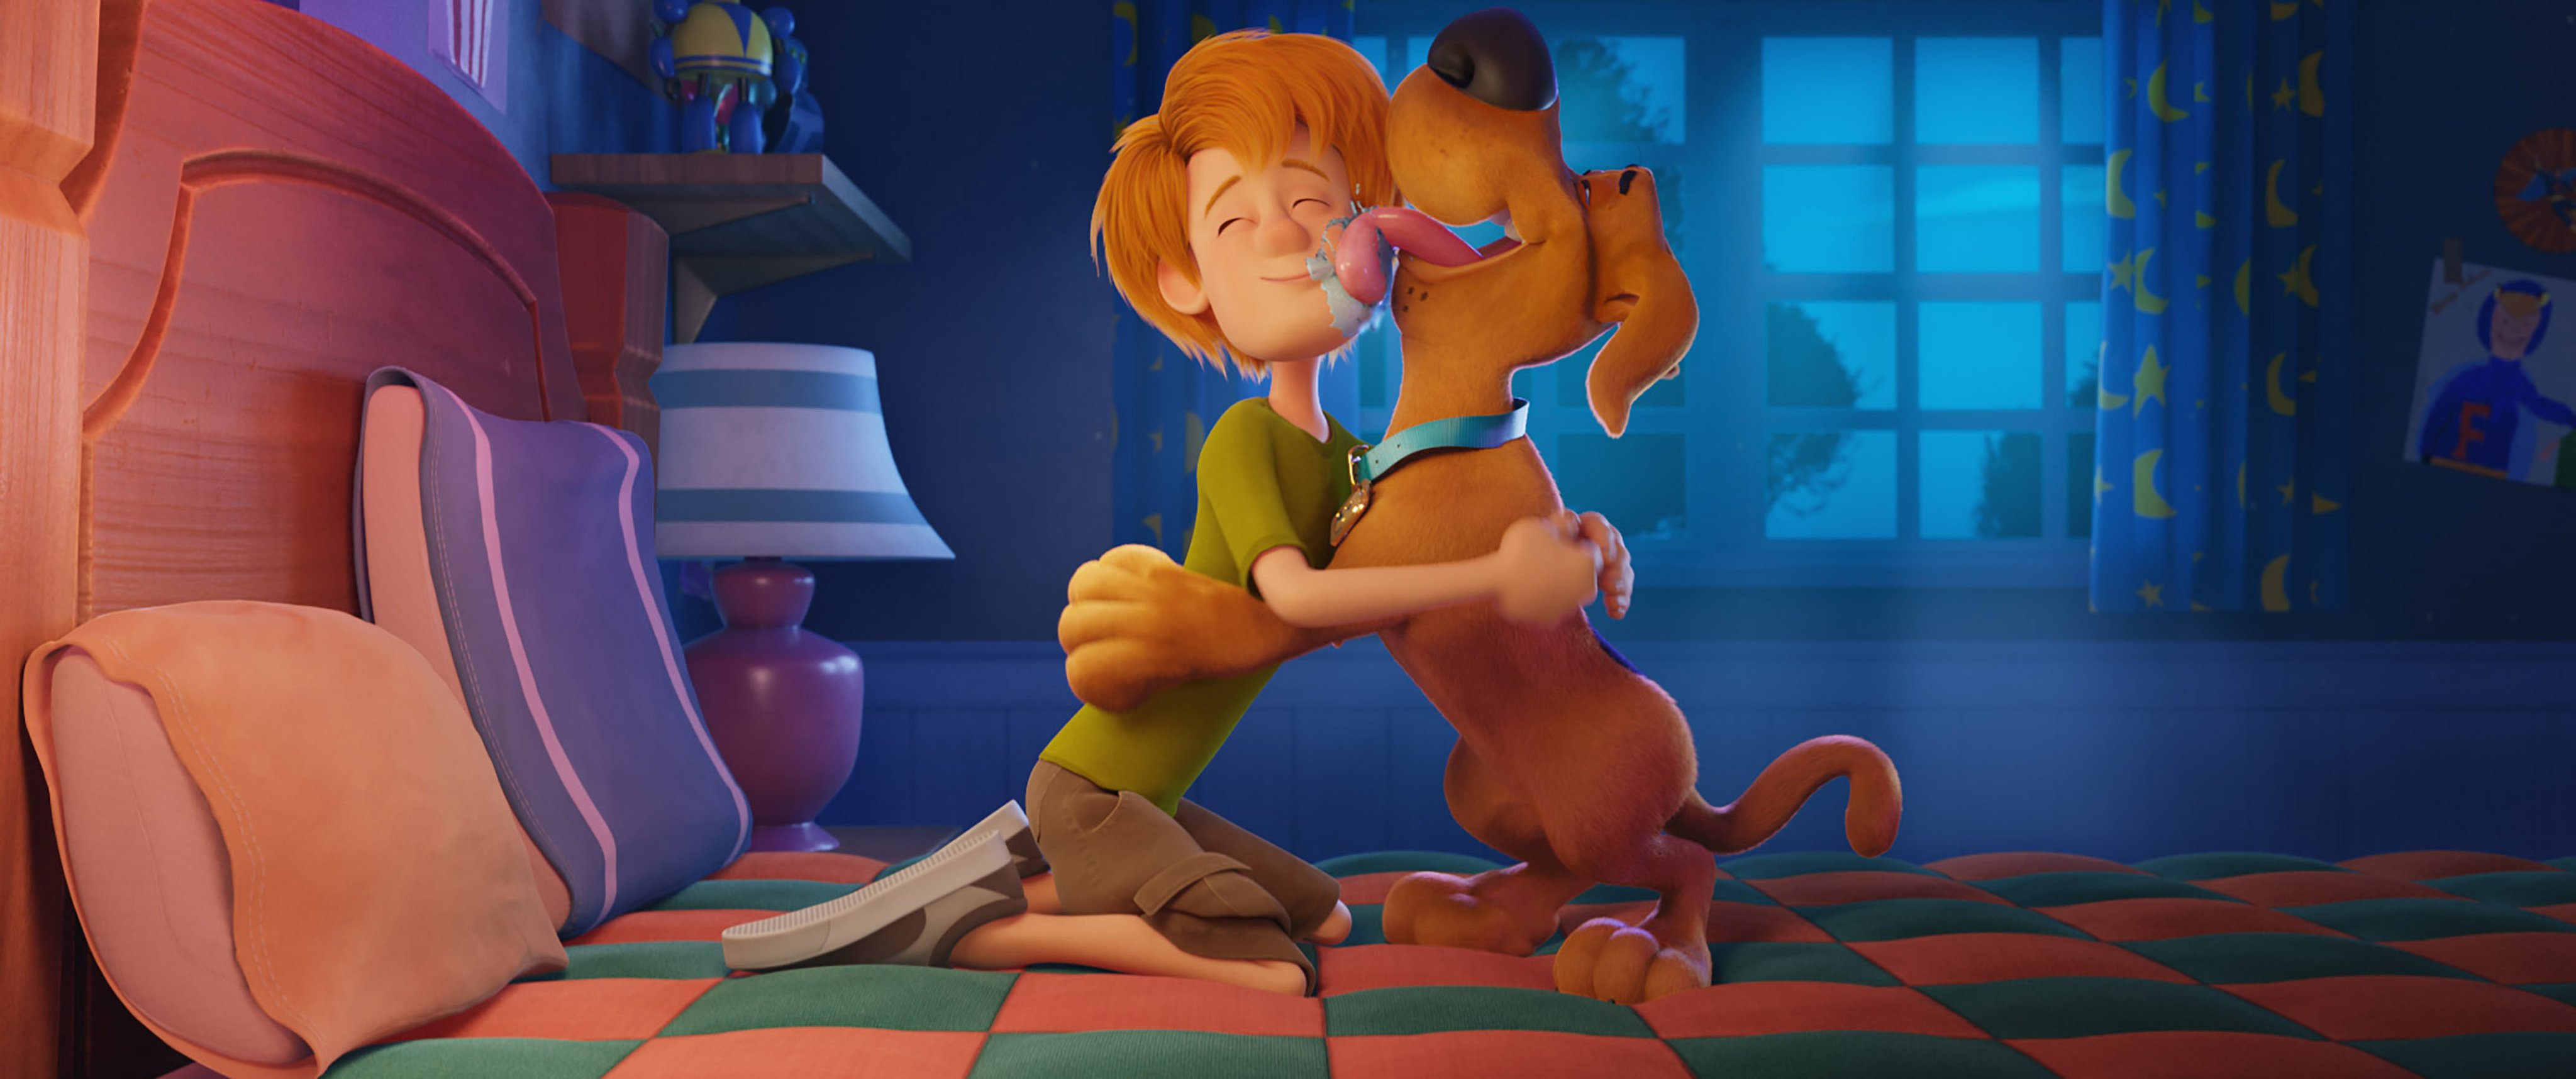 4 - The Reboot of Scooby-Doo in 3D is Coming! - Images, Trailer and Debut Details Revealed